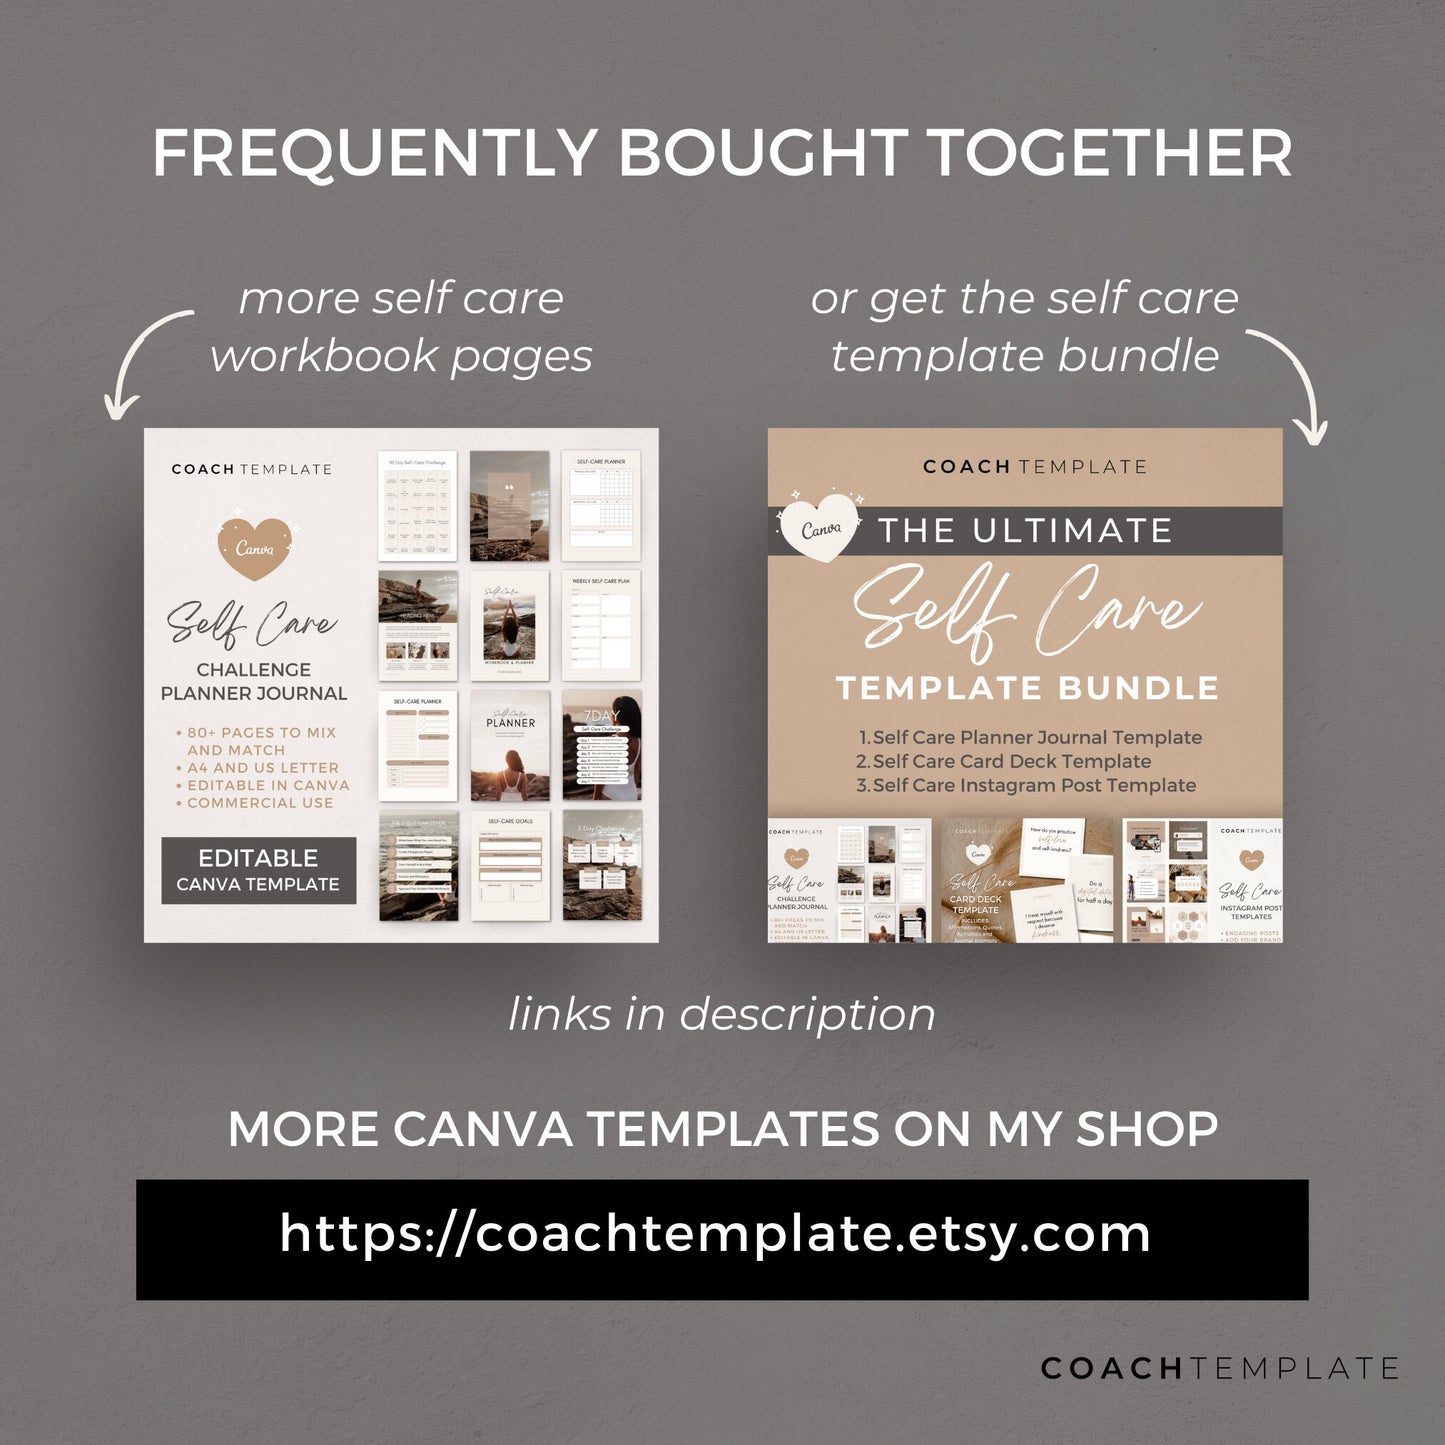 Self Care for Moms Ebook Template Canva, Health & Wellness Coaching Template, Self Care Workbook Canva Template, Lead Magnet, Commercial Use, 100% done-for-you ebook template for coaches, bloggers and online businesses. Coachtempalte.com CT063